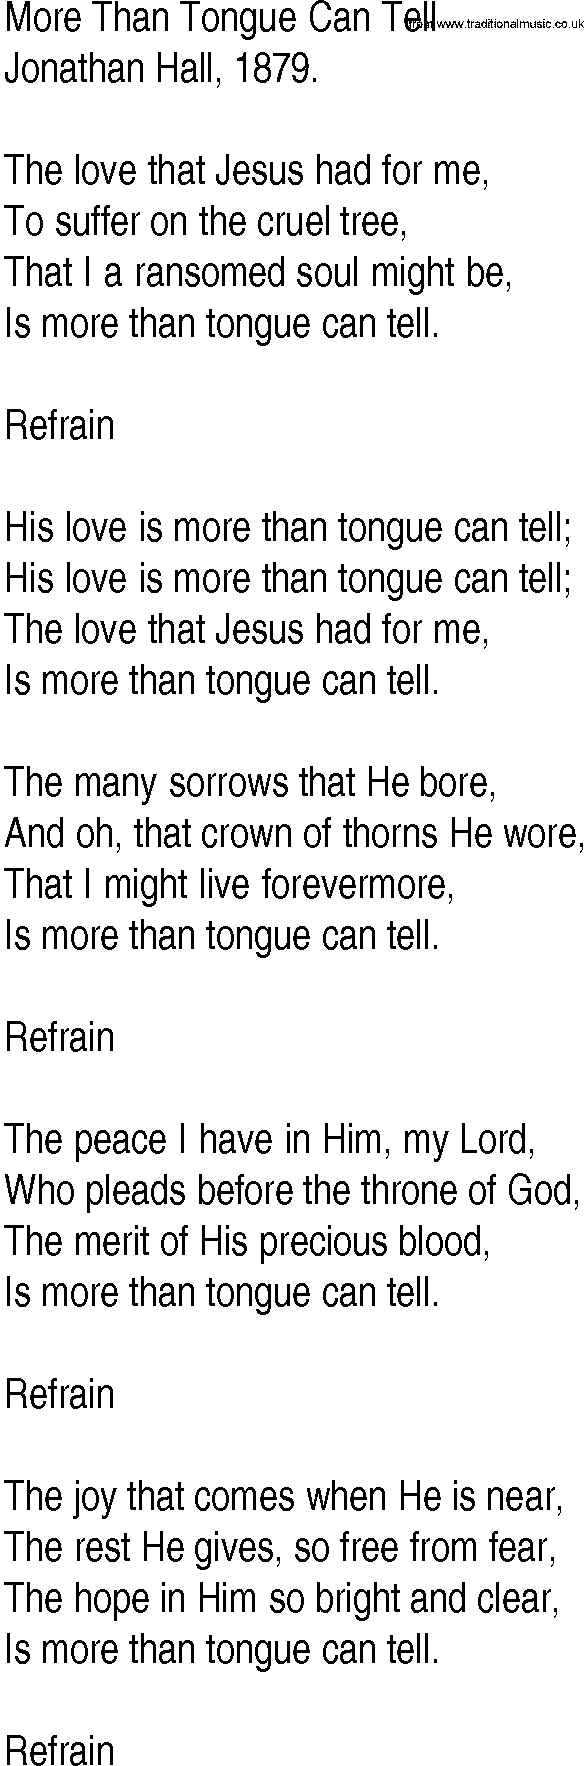 Hymn and Gospel Song: More Than Tongue Can Tell by Jonathan Hall lyrics